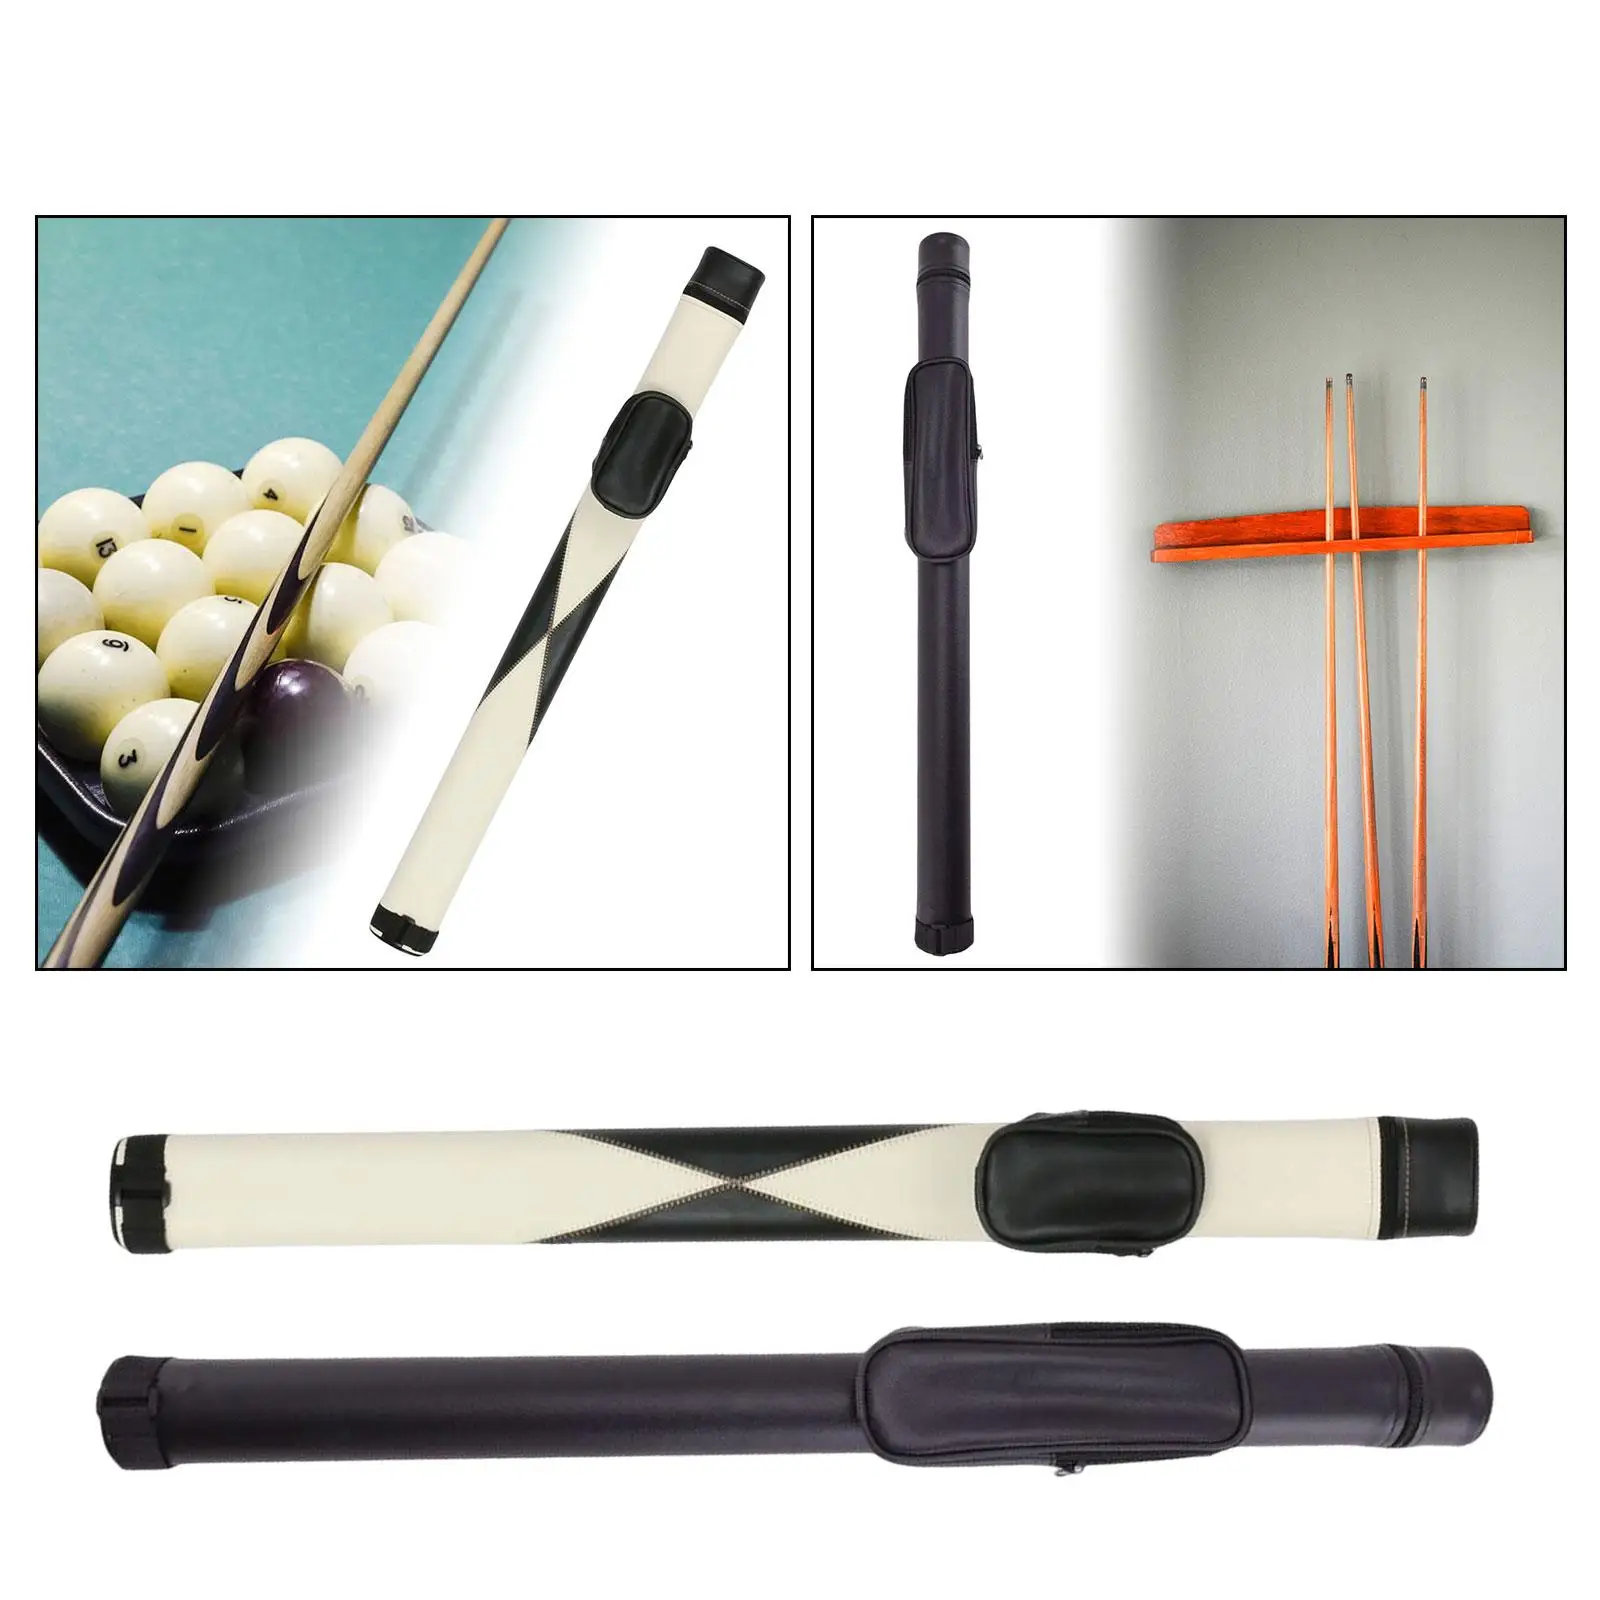 Billiards Pool, Hard Pool Portable Sleeve Holder Organizer Snooker for 1 Complete 2 Cue Snooker